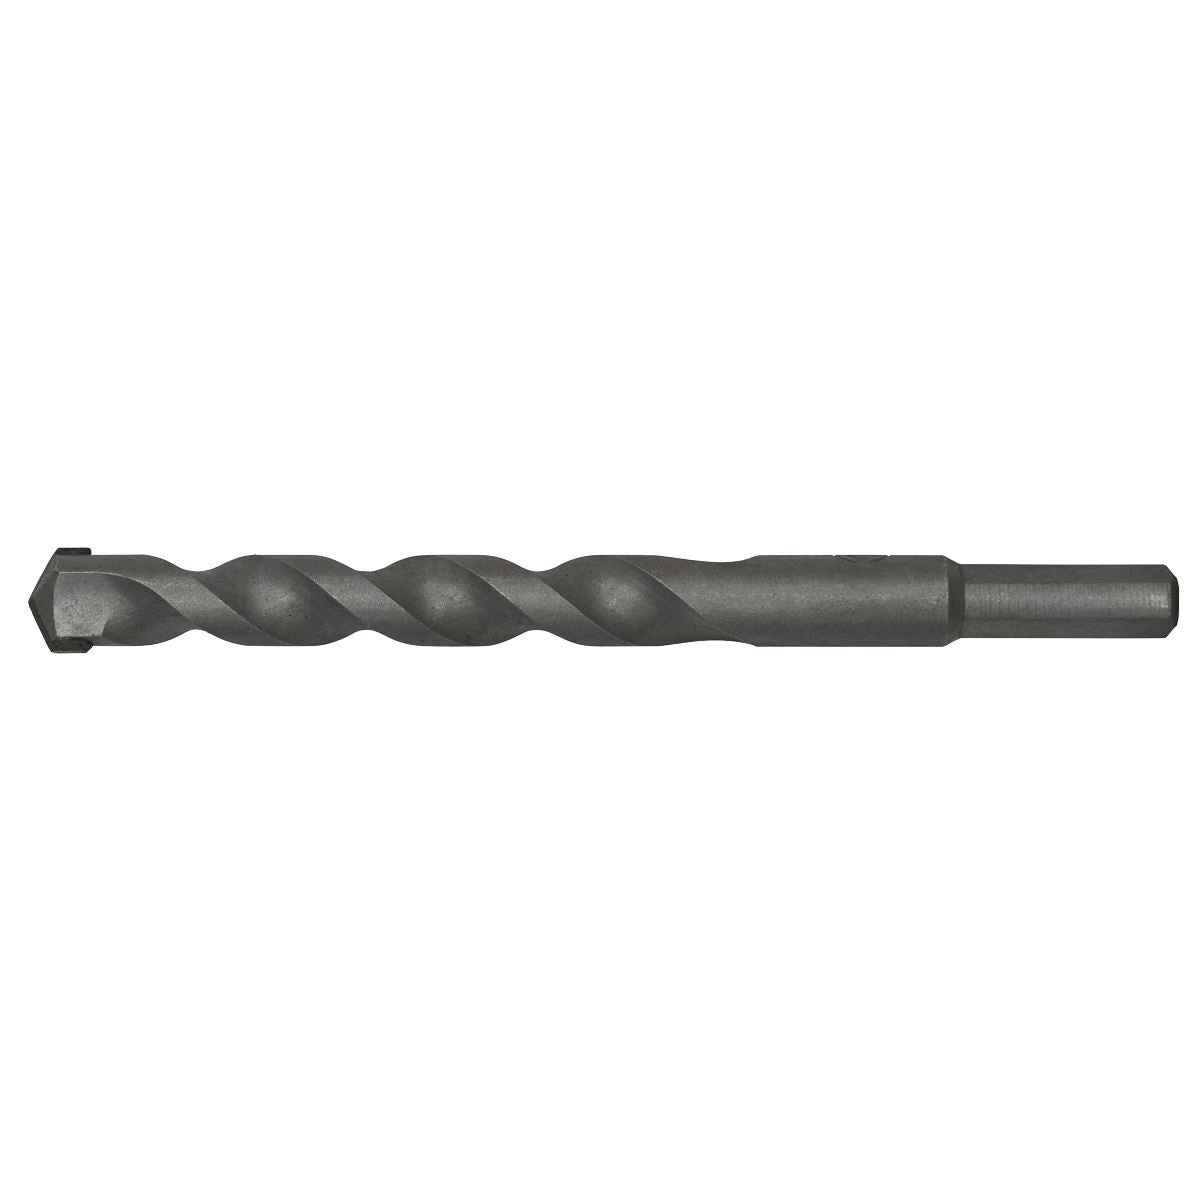 Worksafe by Sealey Straight Shank Rotary Impact Drill Bit Ø16 x 150mm